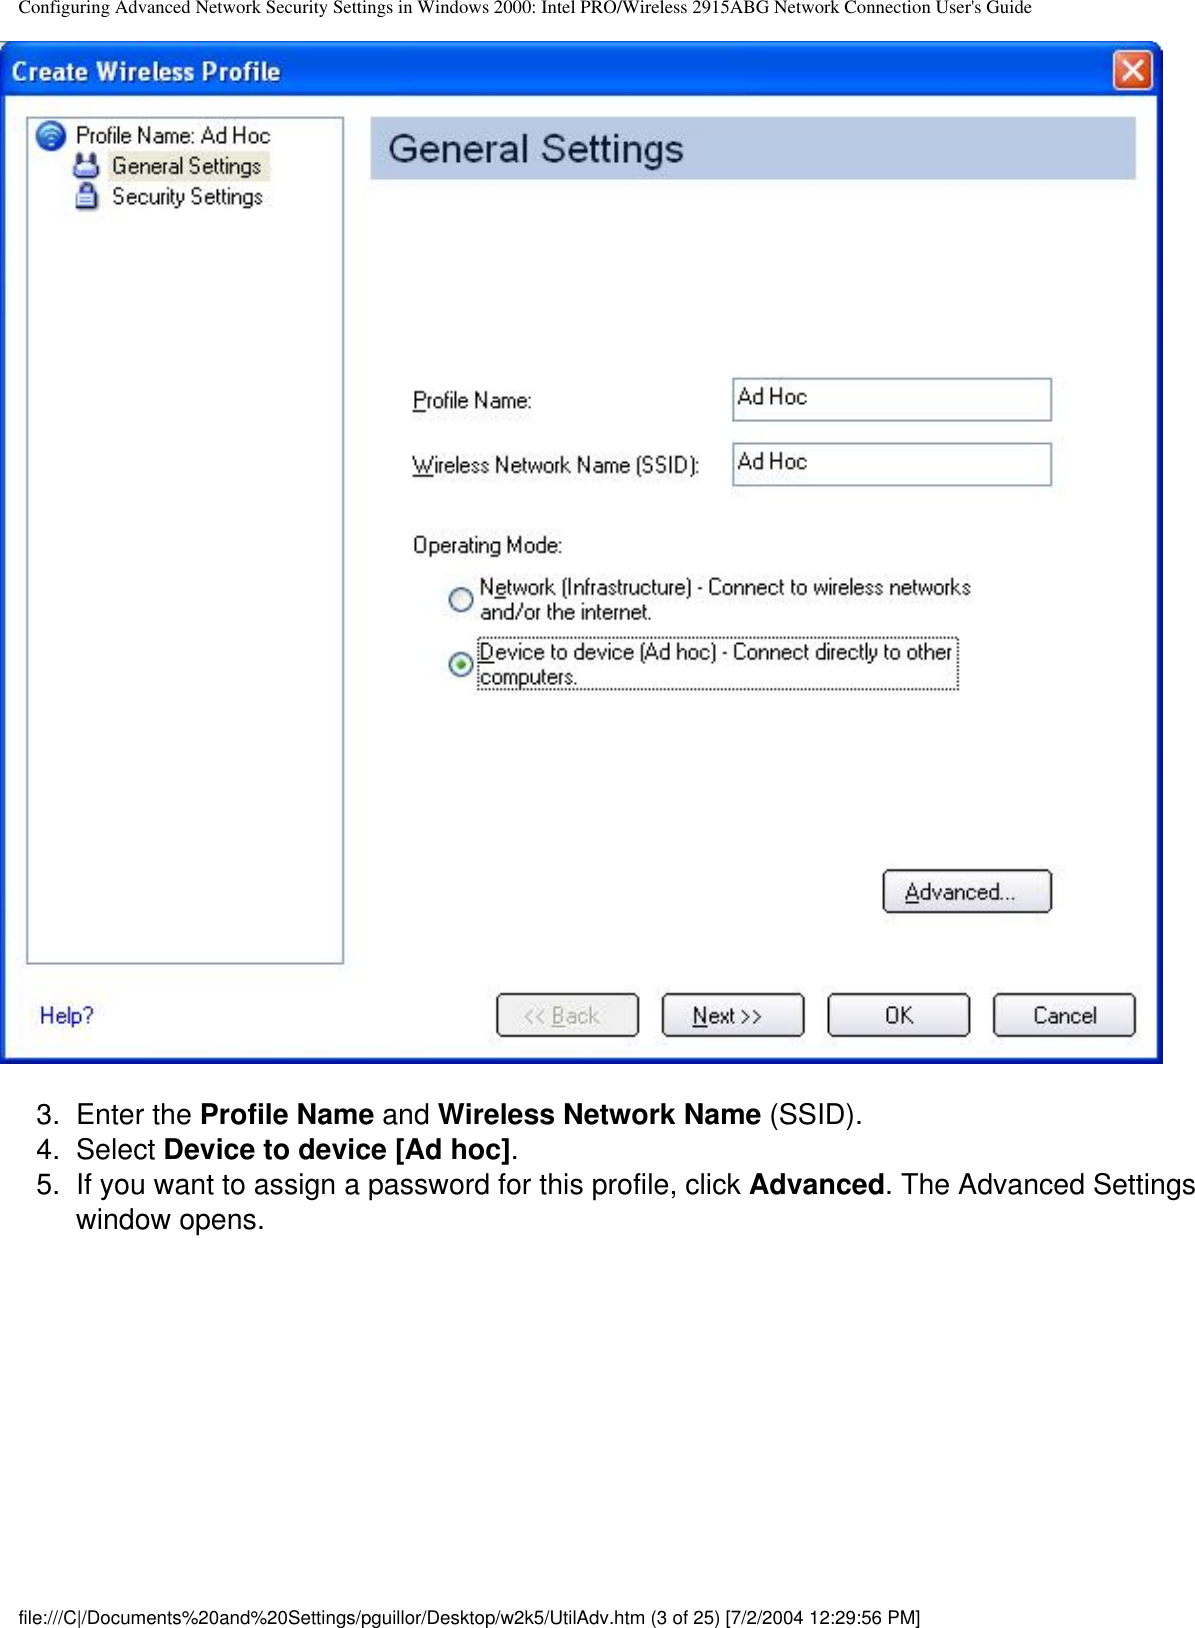 Configuring Advanced Network Security Settings in Windows 2000: Intel PRO/Wireless 2915ABG Network Connection User&apos;s Guide3.  Enter the Profile Name and Wireless Network Name (SSID).4.  Select Device to device [Ad hoc].5.  If you want to assign a password for this profile, click Advanced. The Advanced Settings window opens.file:///C|/Documents%20and%20Settings/pguillor/Desktop/w2k5/UtilAdv.htm (3 of 25) [7/2/2004 12:29:56 PM]